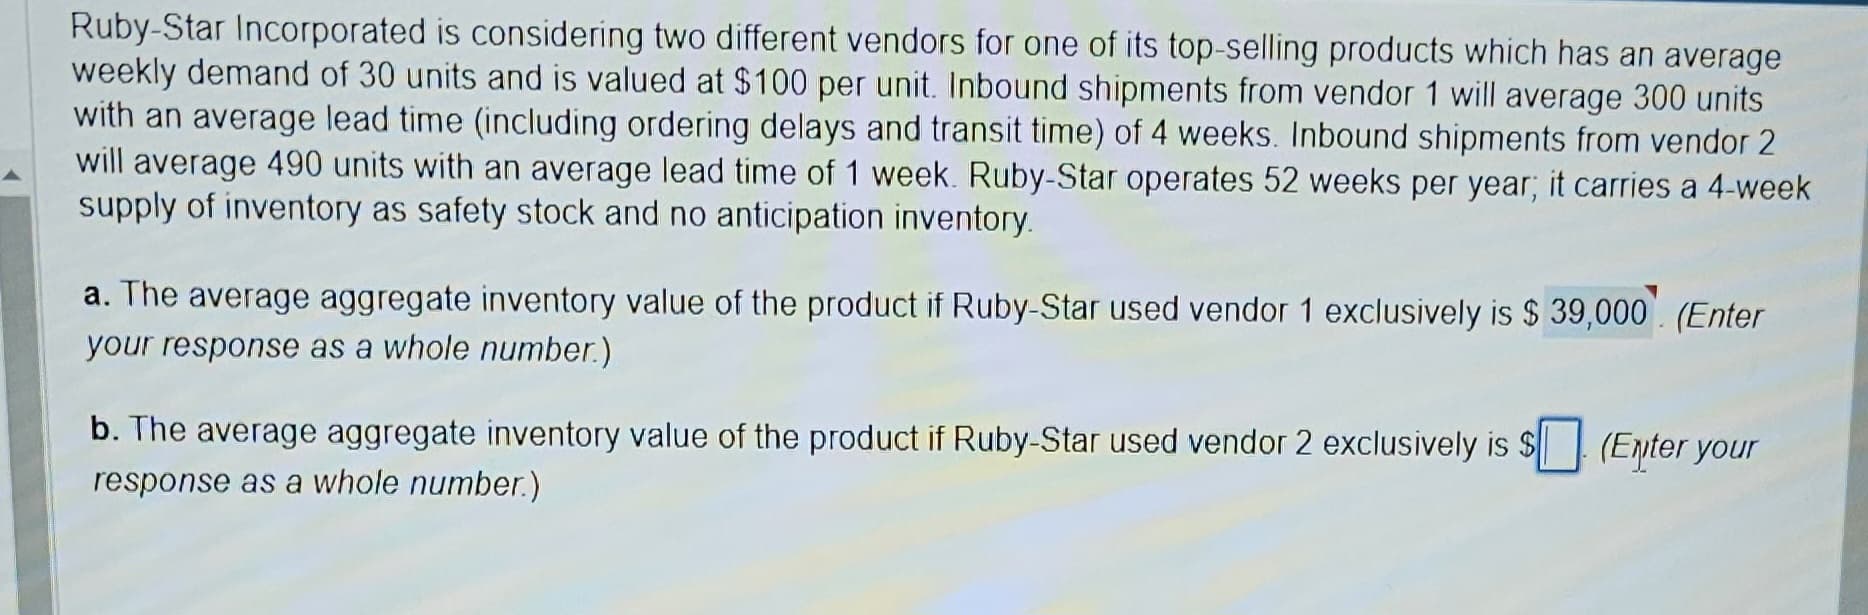 Ruby-Star Incorporated is considering two different vendors for one of its top-selling products which has an average
weekly demand of 30 units and is valued at $100 per unit. Inbound shipments from vendor 1 will average 300 units
with an average lead time (including ordering delays and transit time) of 4 weeks. Inbound shipments from vendor 2
will average 490 units with an average lead time of 1 week. Ruby-Star operates 52 weeks per year; it carries a 4-week
supply of inventory as safety stock and no anticipation inventory.
a. The average aggregate inventory value of the product if Ruby-Star used vendor 1 exclusively is $39,000. (Enter
your response as a whole number.)
b. The average aggregate inventory value of the product if Ruby-Star used vendor 2 exclusively is $ (Enter your
response as a whole number.)